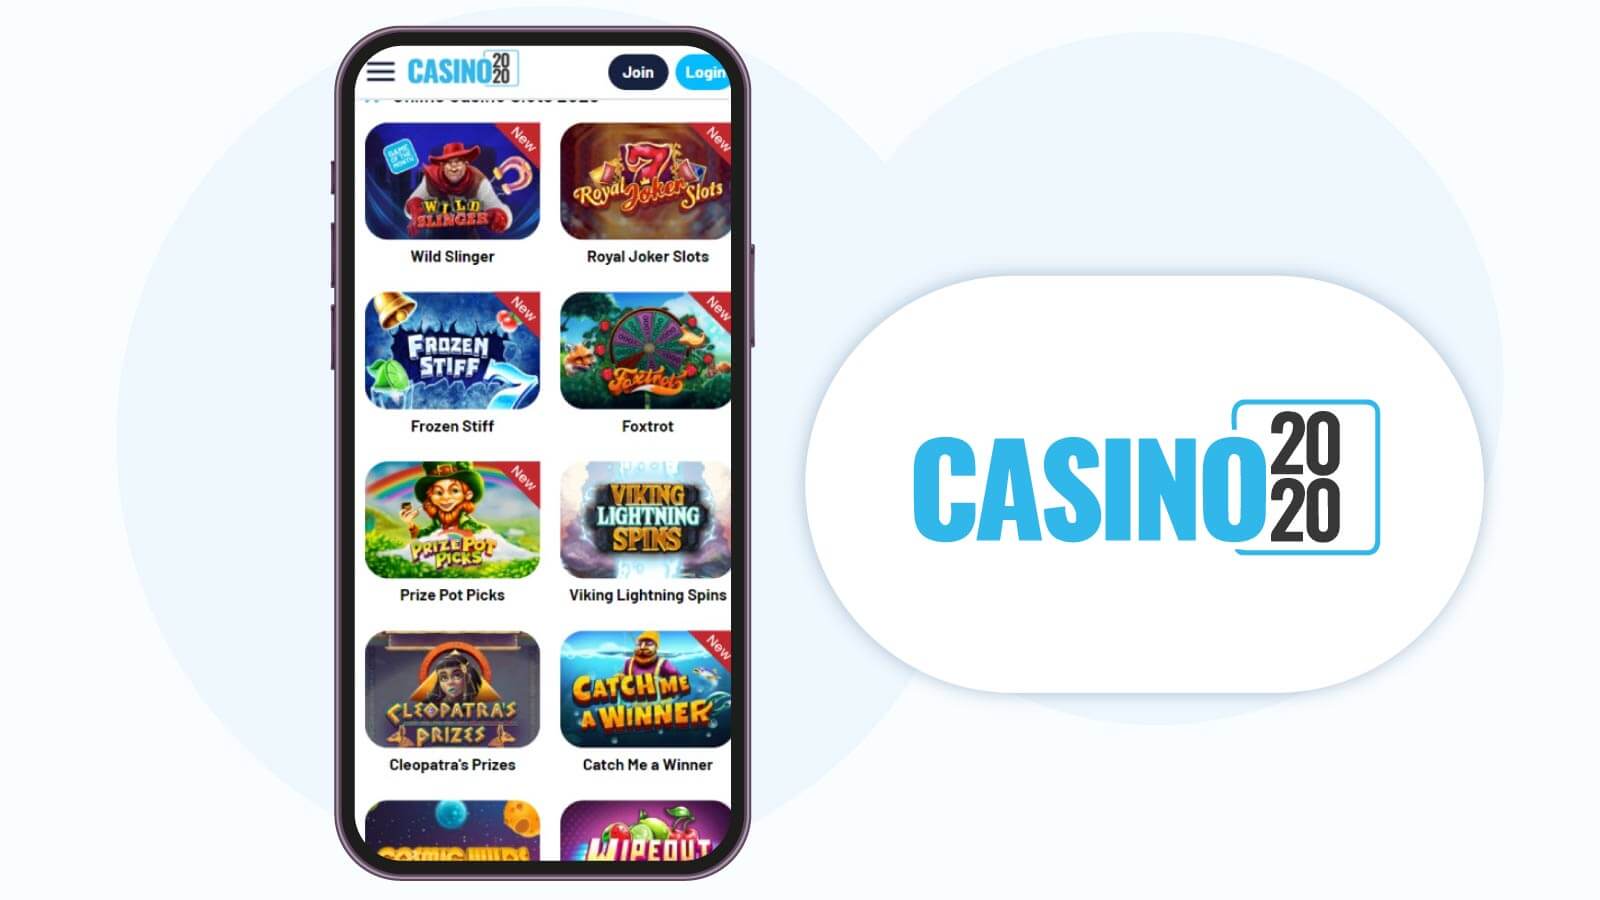 Casino-2020-top-mobile-verification-free-spins-for-UK